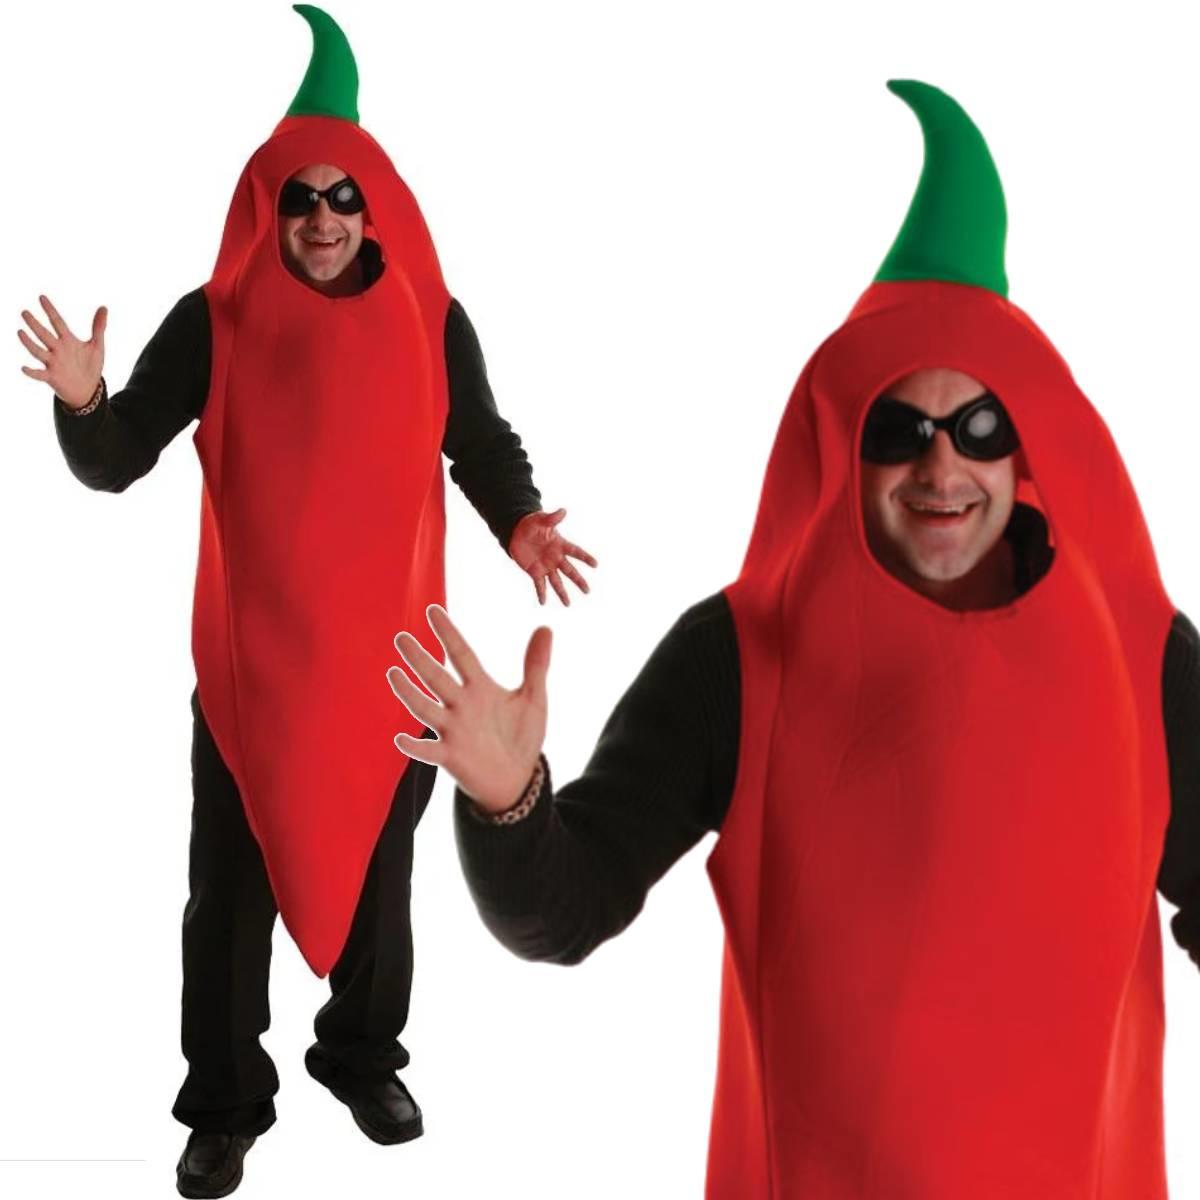 Adult funny Vindaloo Chili Pepper Costume for adults by Wicked FN8606 available from a collection of chilli pepper outfits (oh yes) here at Karnival Costumes online party shop